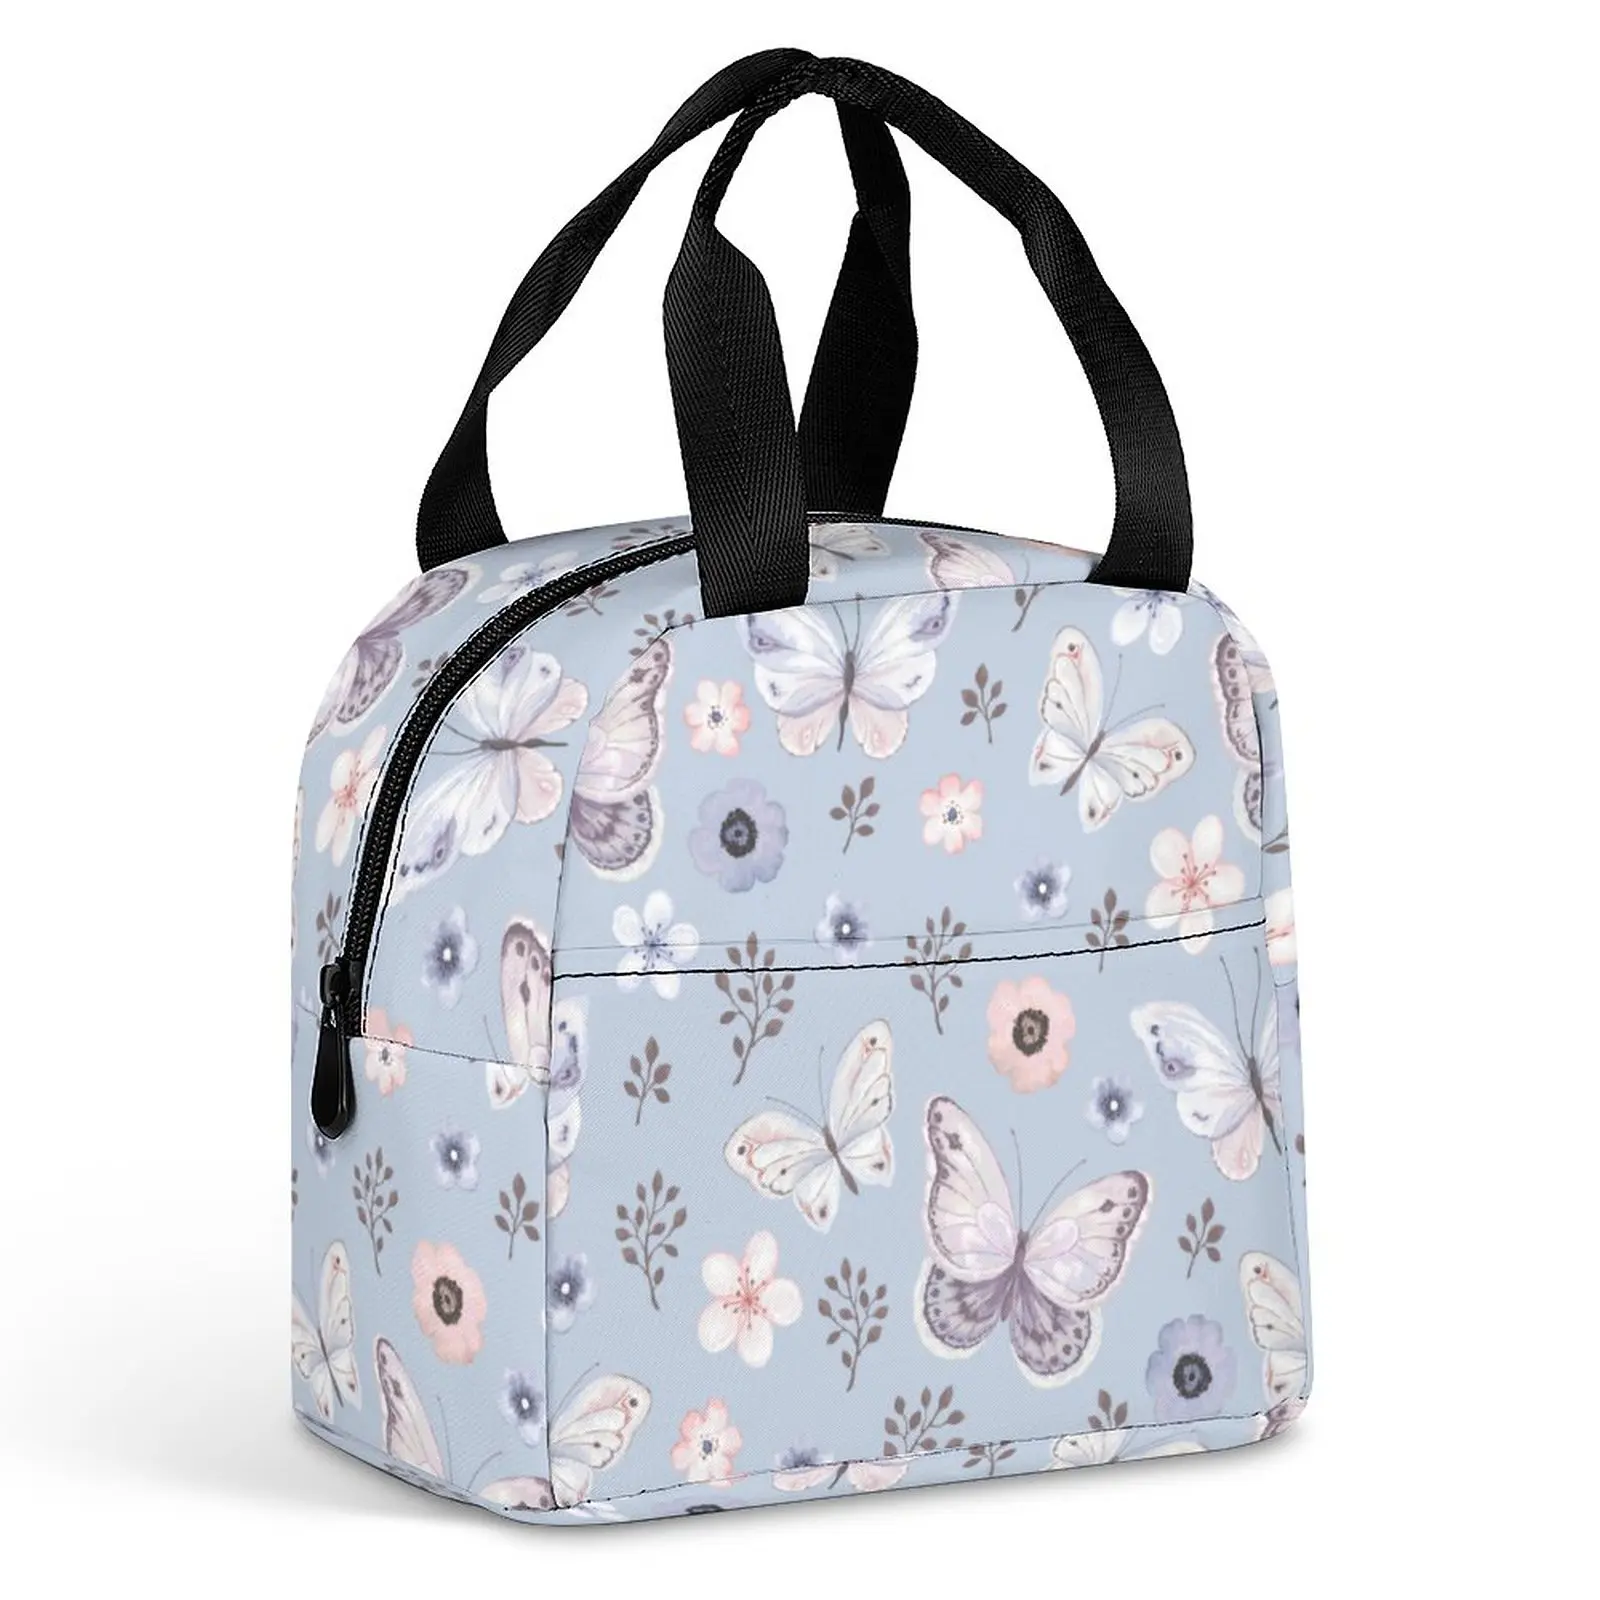 Custom Pattern Tote Lunch Bags for Women Butterfly Blue Print Portable Meal Bag Picnic Travel Breakfast Box Office Work School